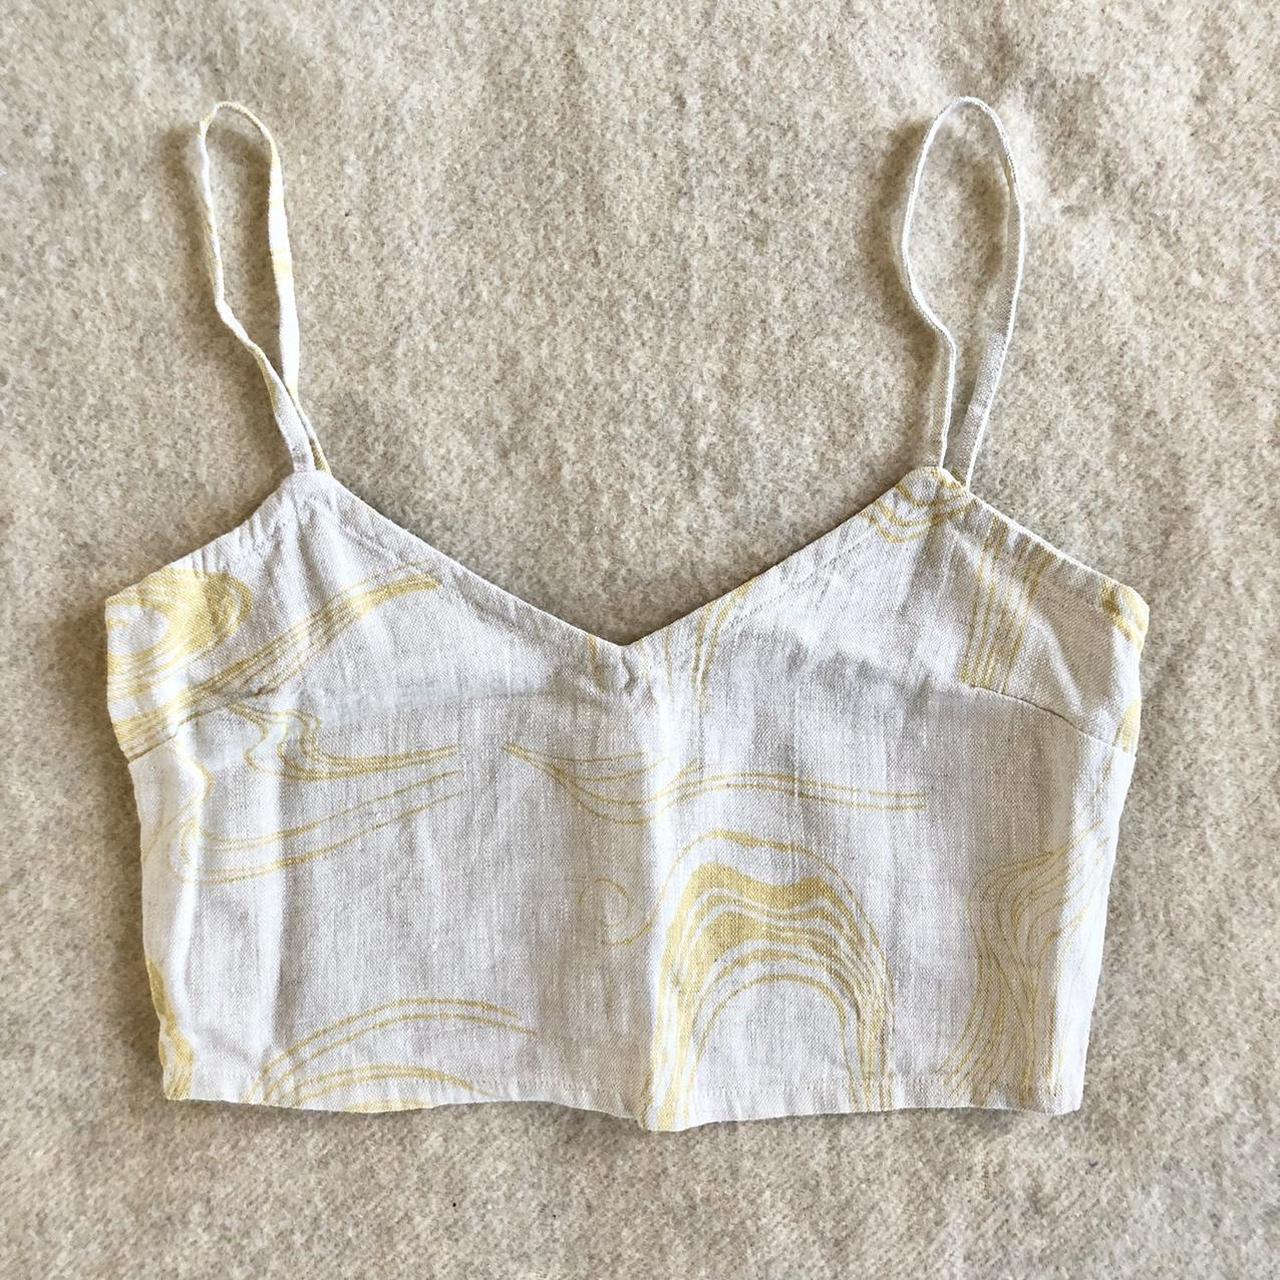 Paloma Wool Women's Cream and Yellow Vests-tanks-camis